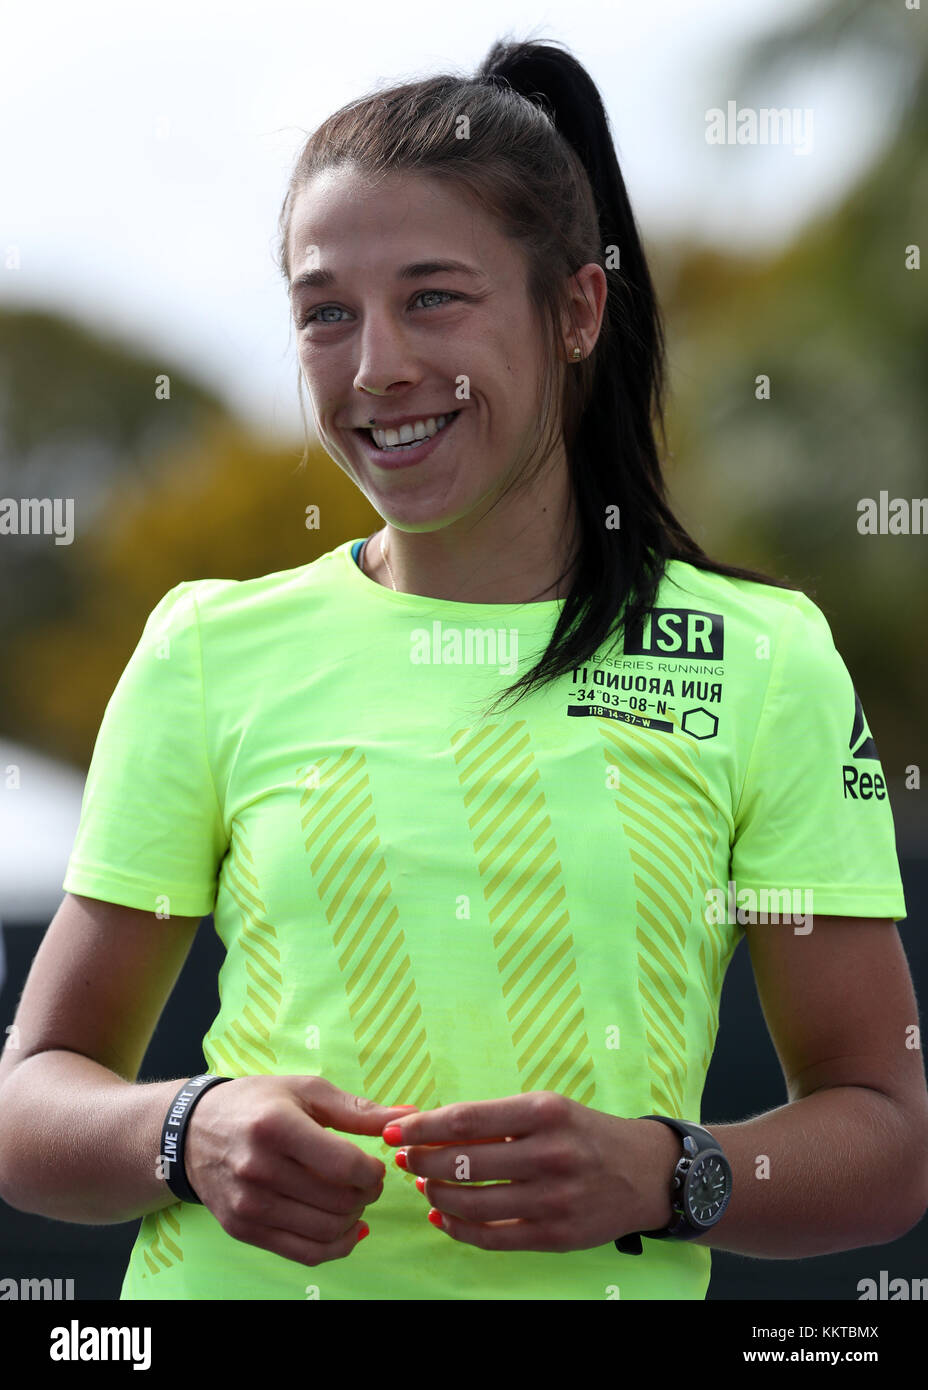 KEY BISCAYNE, FL - MARCH 26: Joanna Jedrzejczyk on day 7 of the Miami Open at Crandon Park Tennis Center. Joanna Jędrzejczyk is a Polish mixed martial artist who competes in the women's strawweight division of the Ultimate Fighting Championship on March 26, 2017 in Key Biscayne, Florida   People:  Joanna Jedrzejczyk Stock Photo